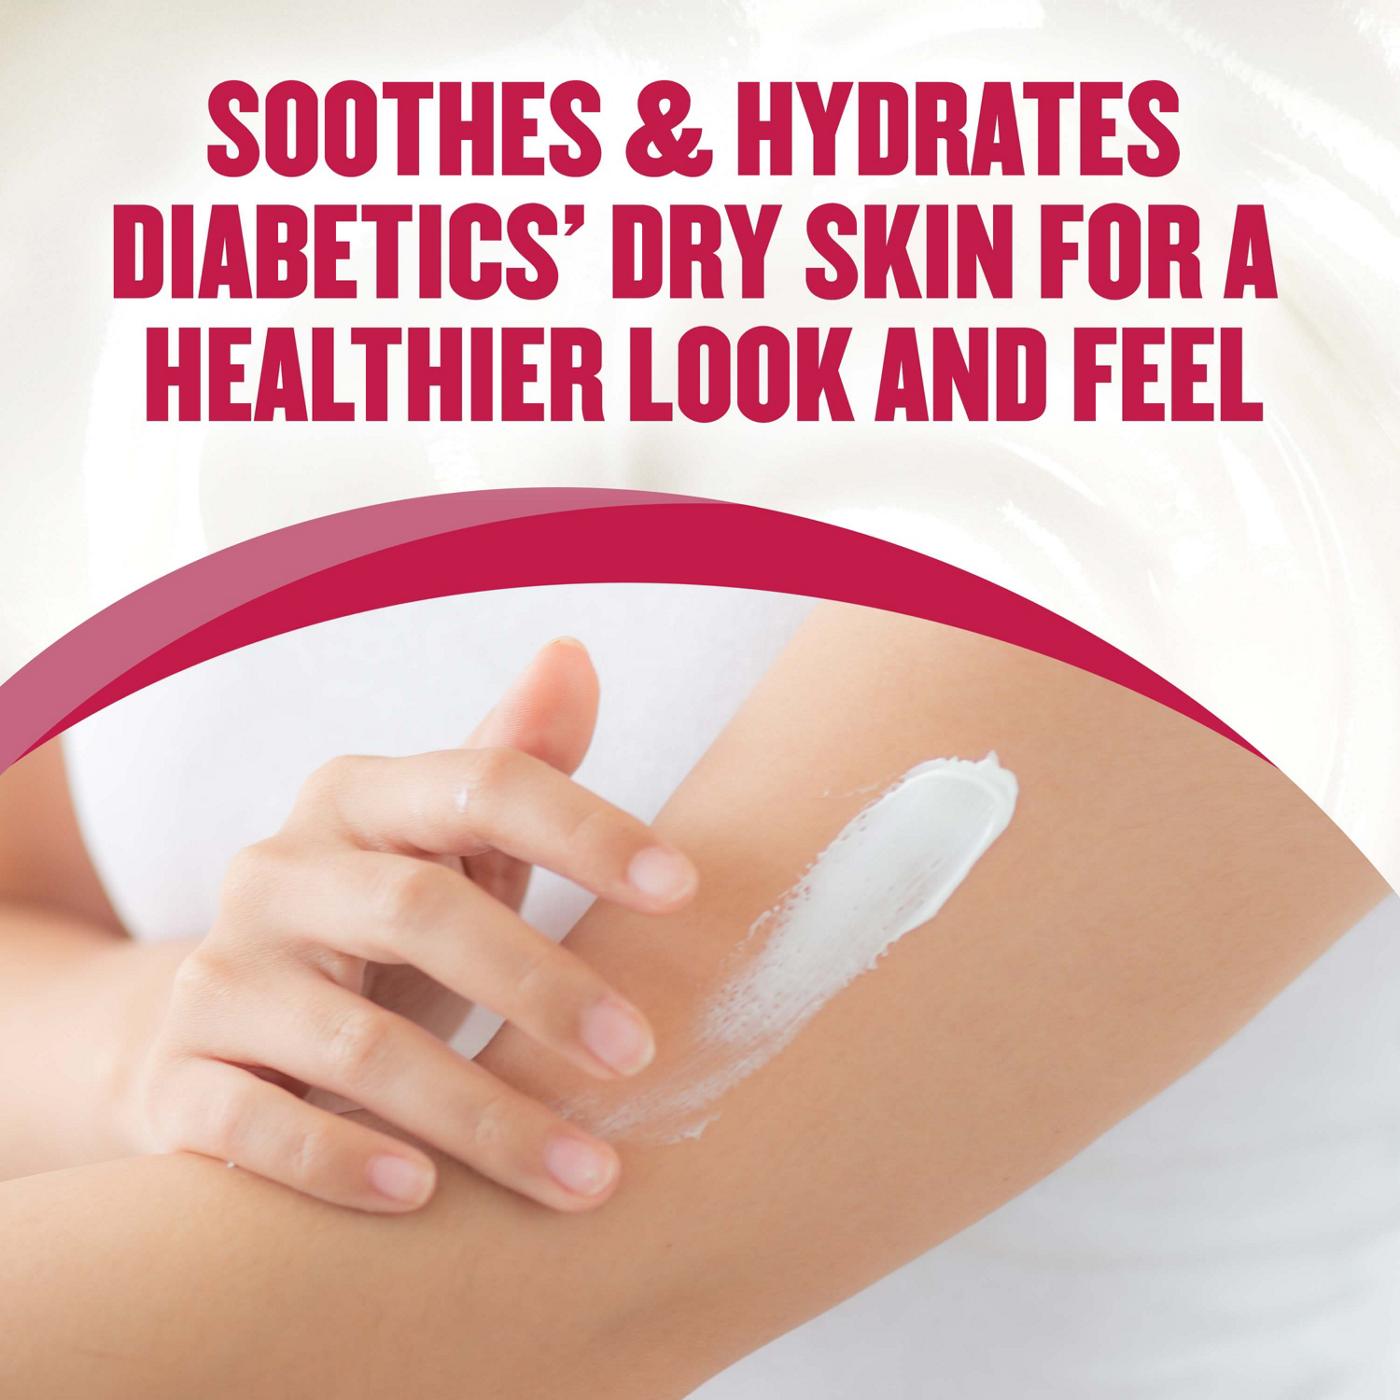 Gold Bond Diabetics' Dry Skin Relief Body Lotion, With Aloe to Moisturize & Soothe; image 2 of 3